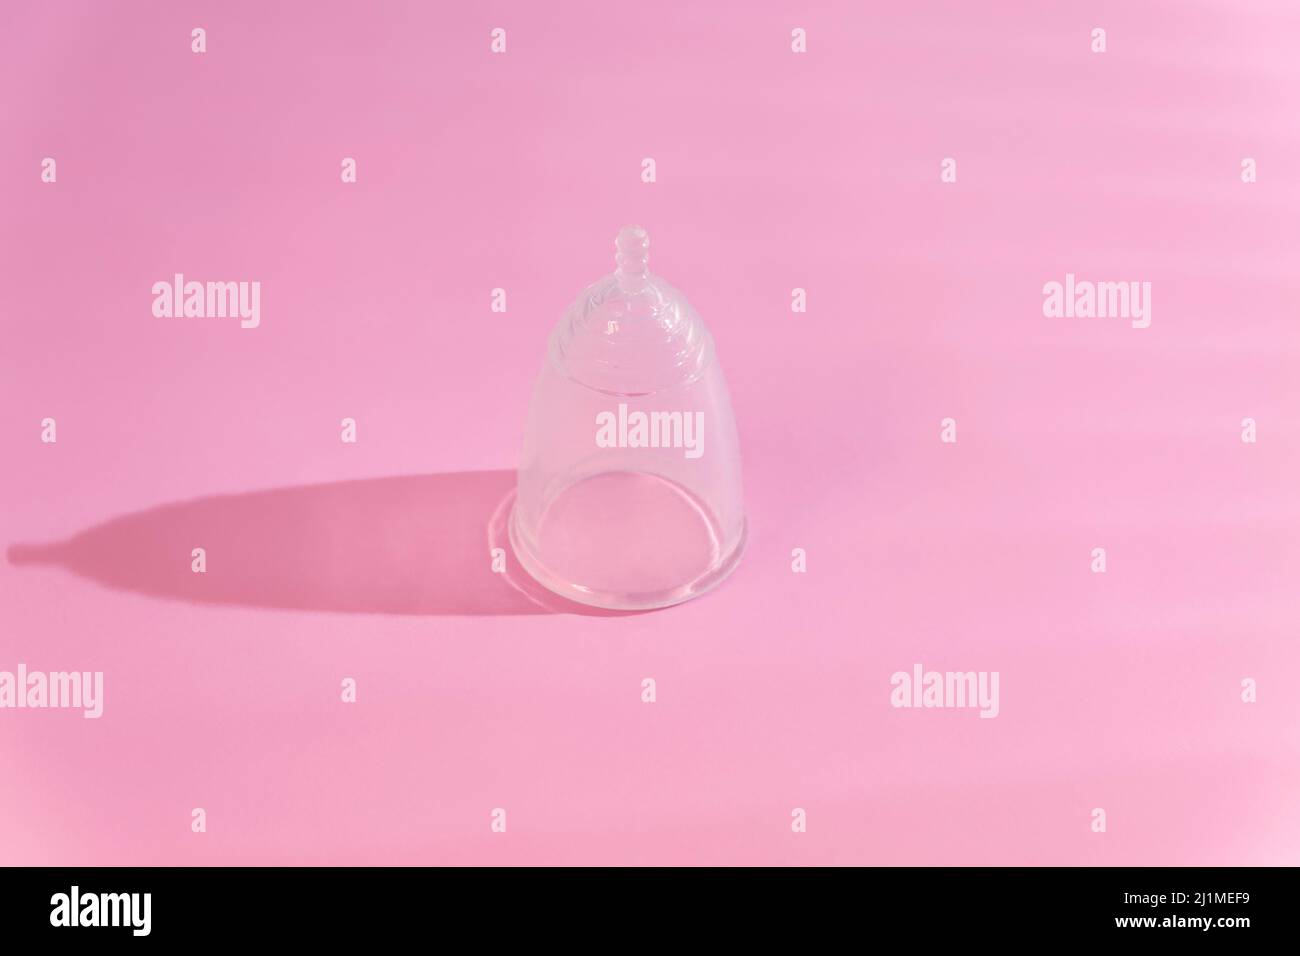 Eco menstrual cup on pink background with creative shadows Stock Photo